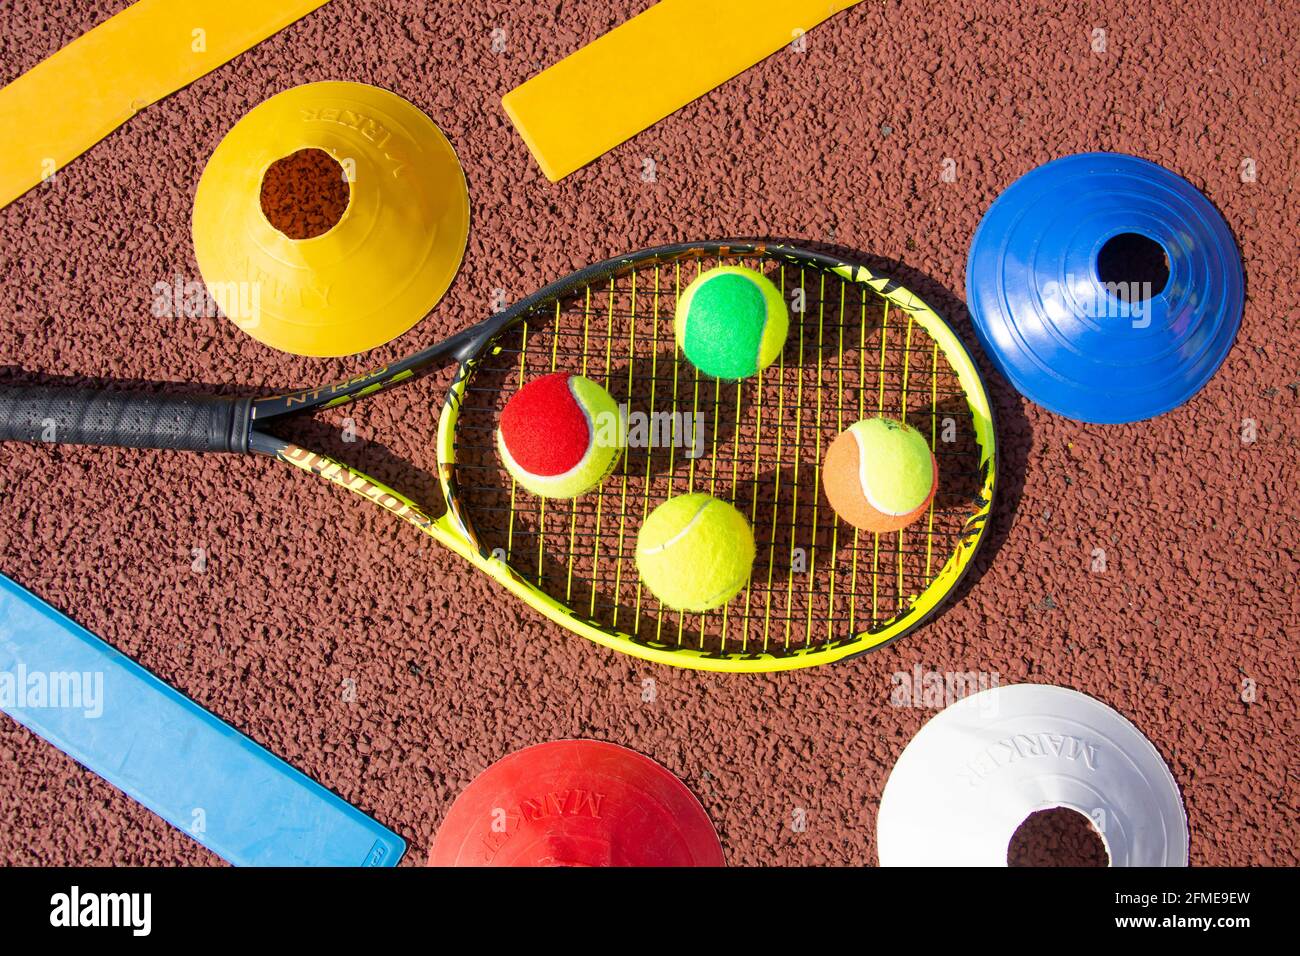 Selection of red, green, orange and yellow tennis balls on tennis racket with lay-downs and cones, Surrey, England, United Kingdom Stock Photo